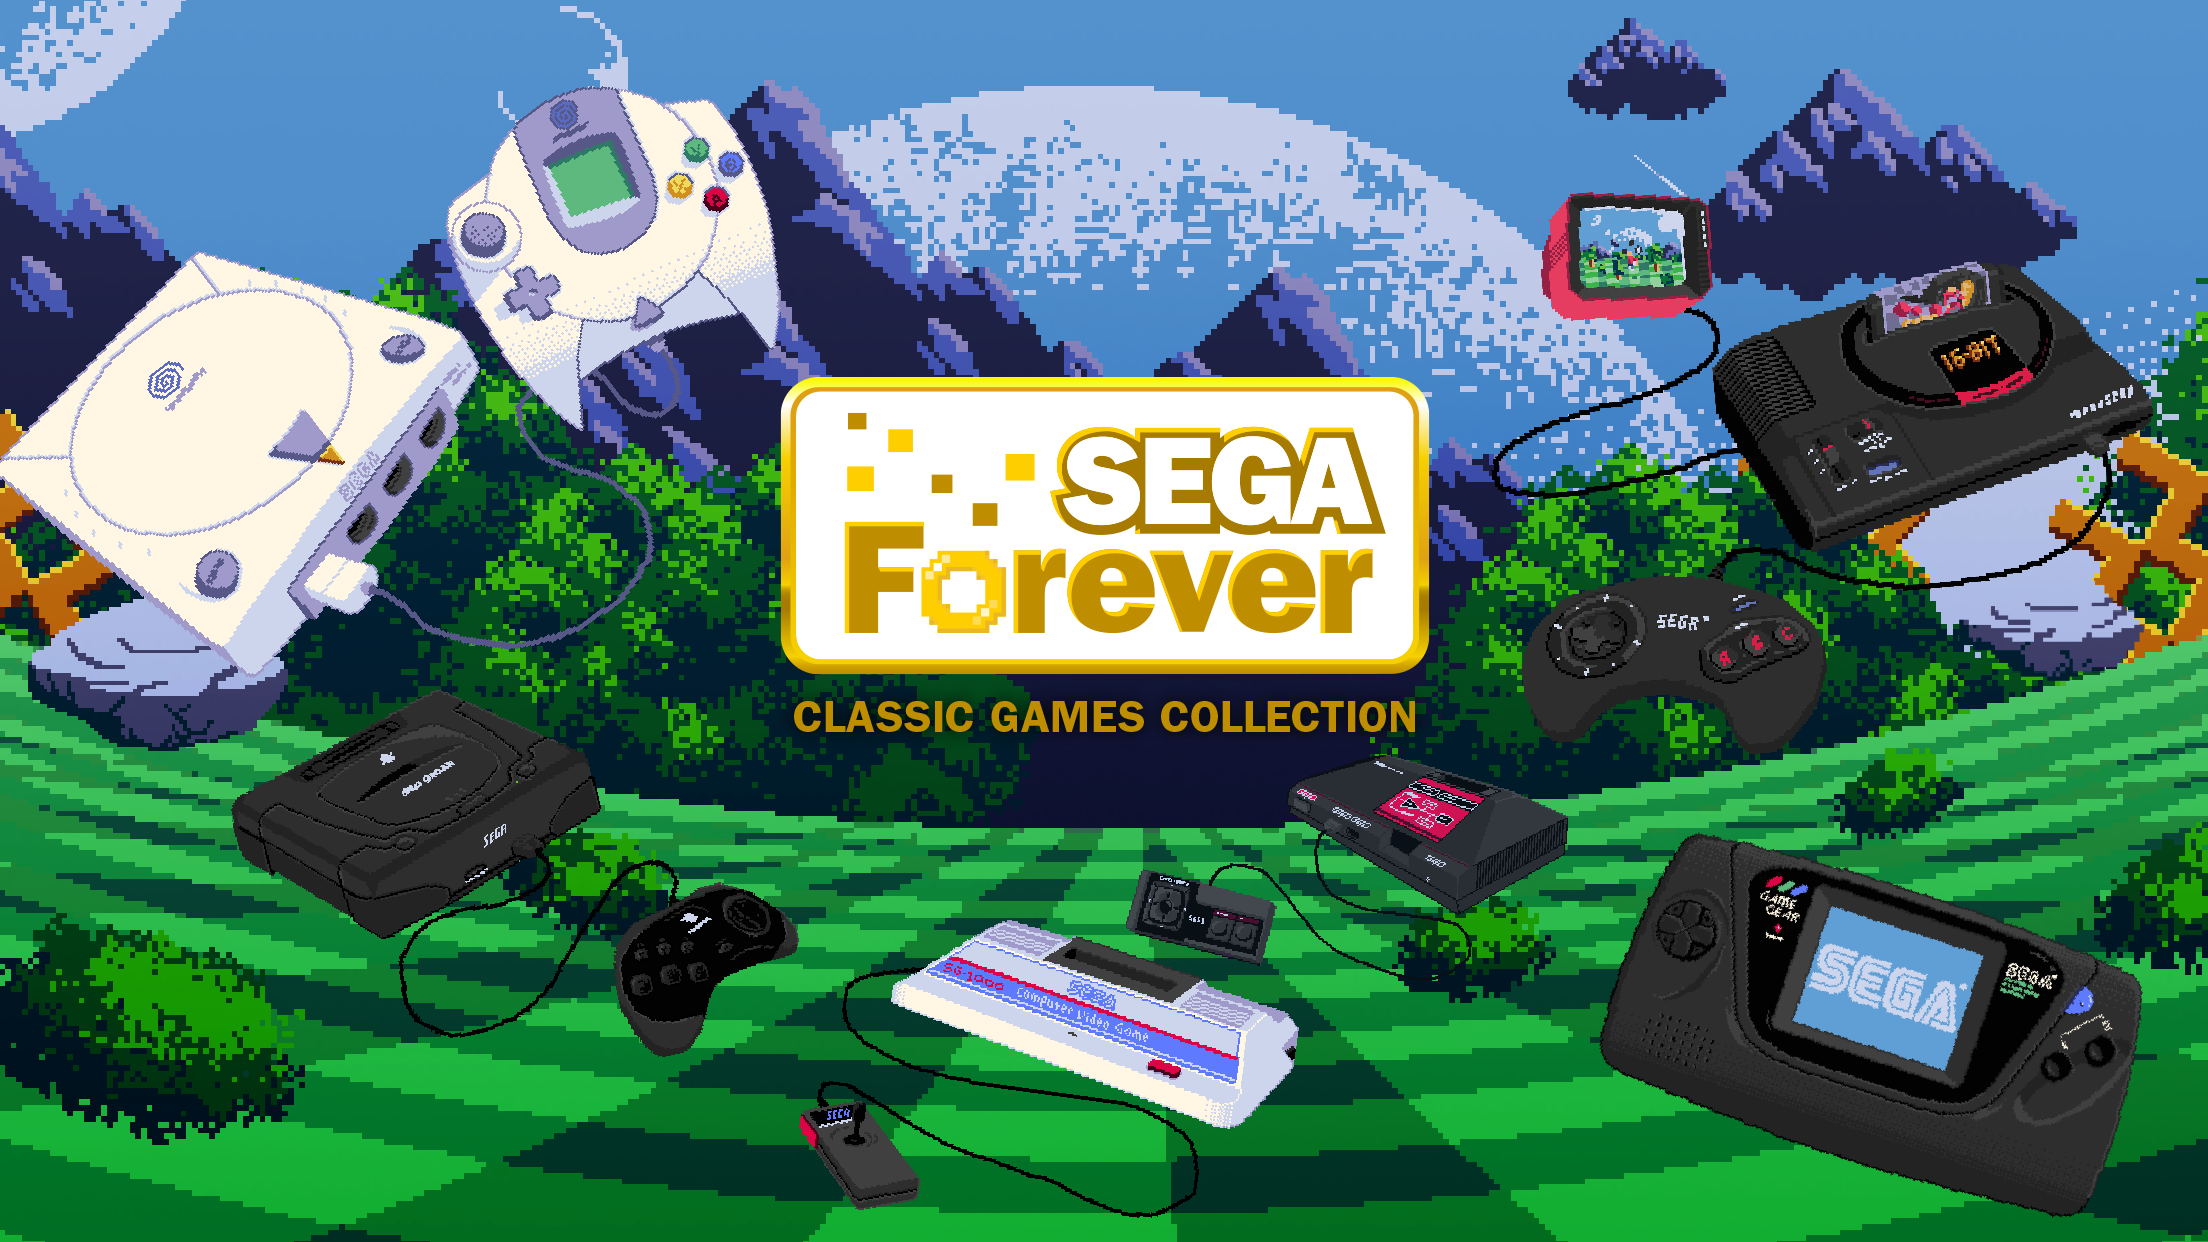 Sega Forever brings retro games to iOS and Android for free | Ars